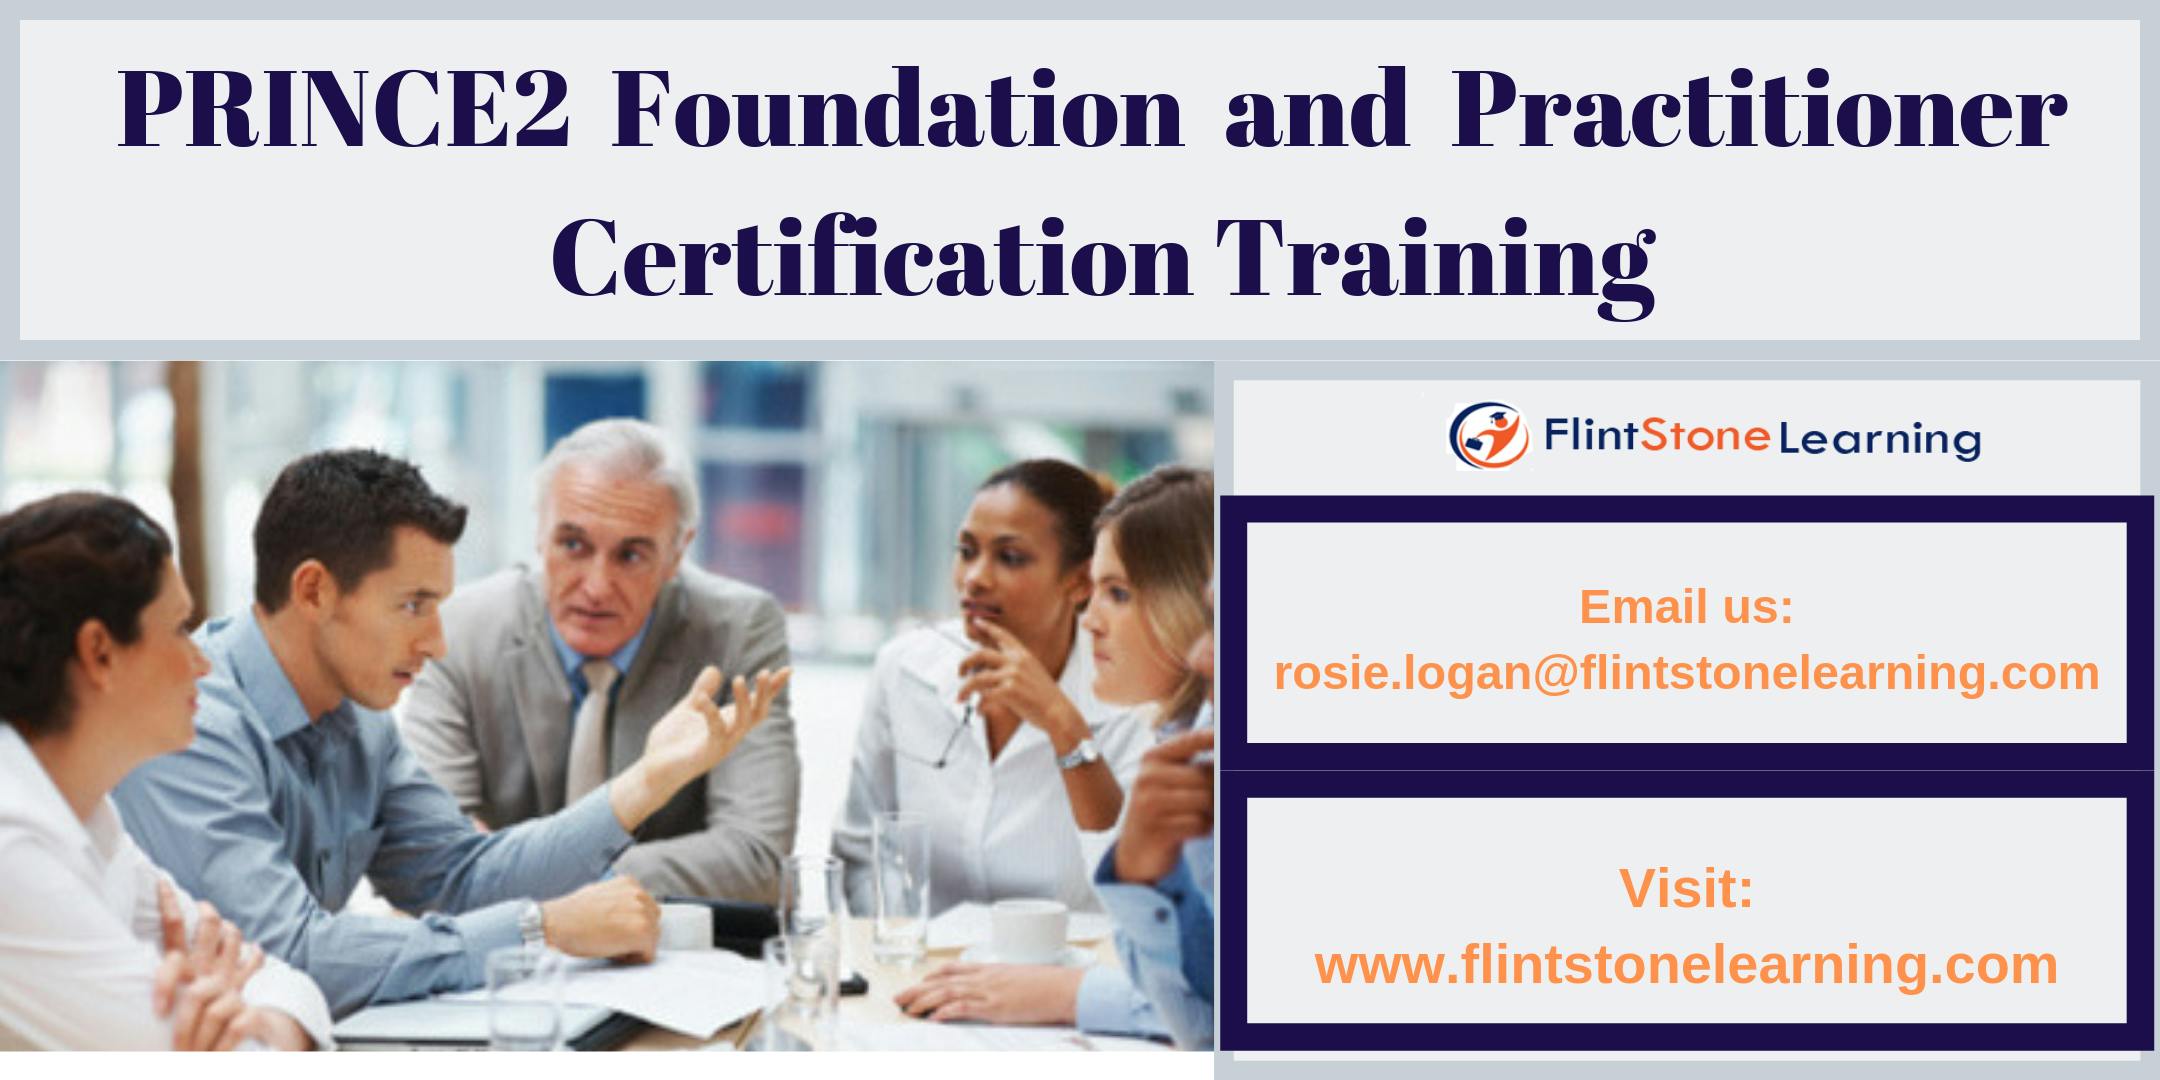 PRINCE2 certification course Training in Byron Bay,NSW